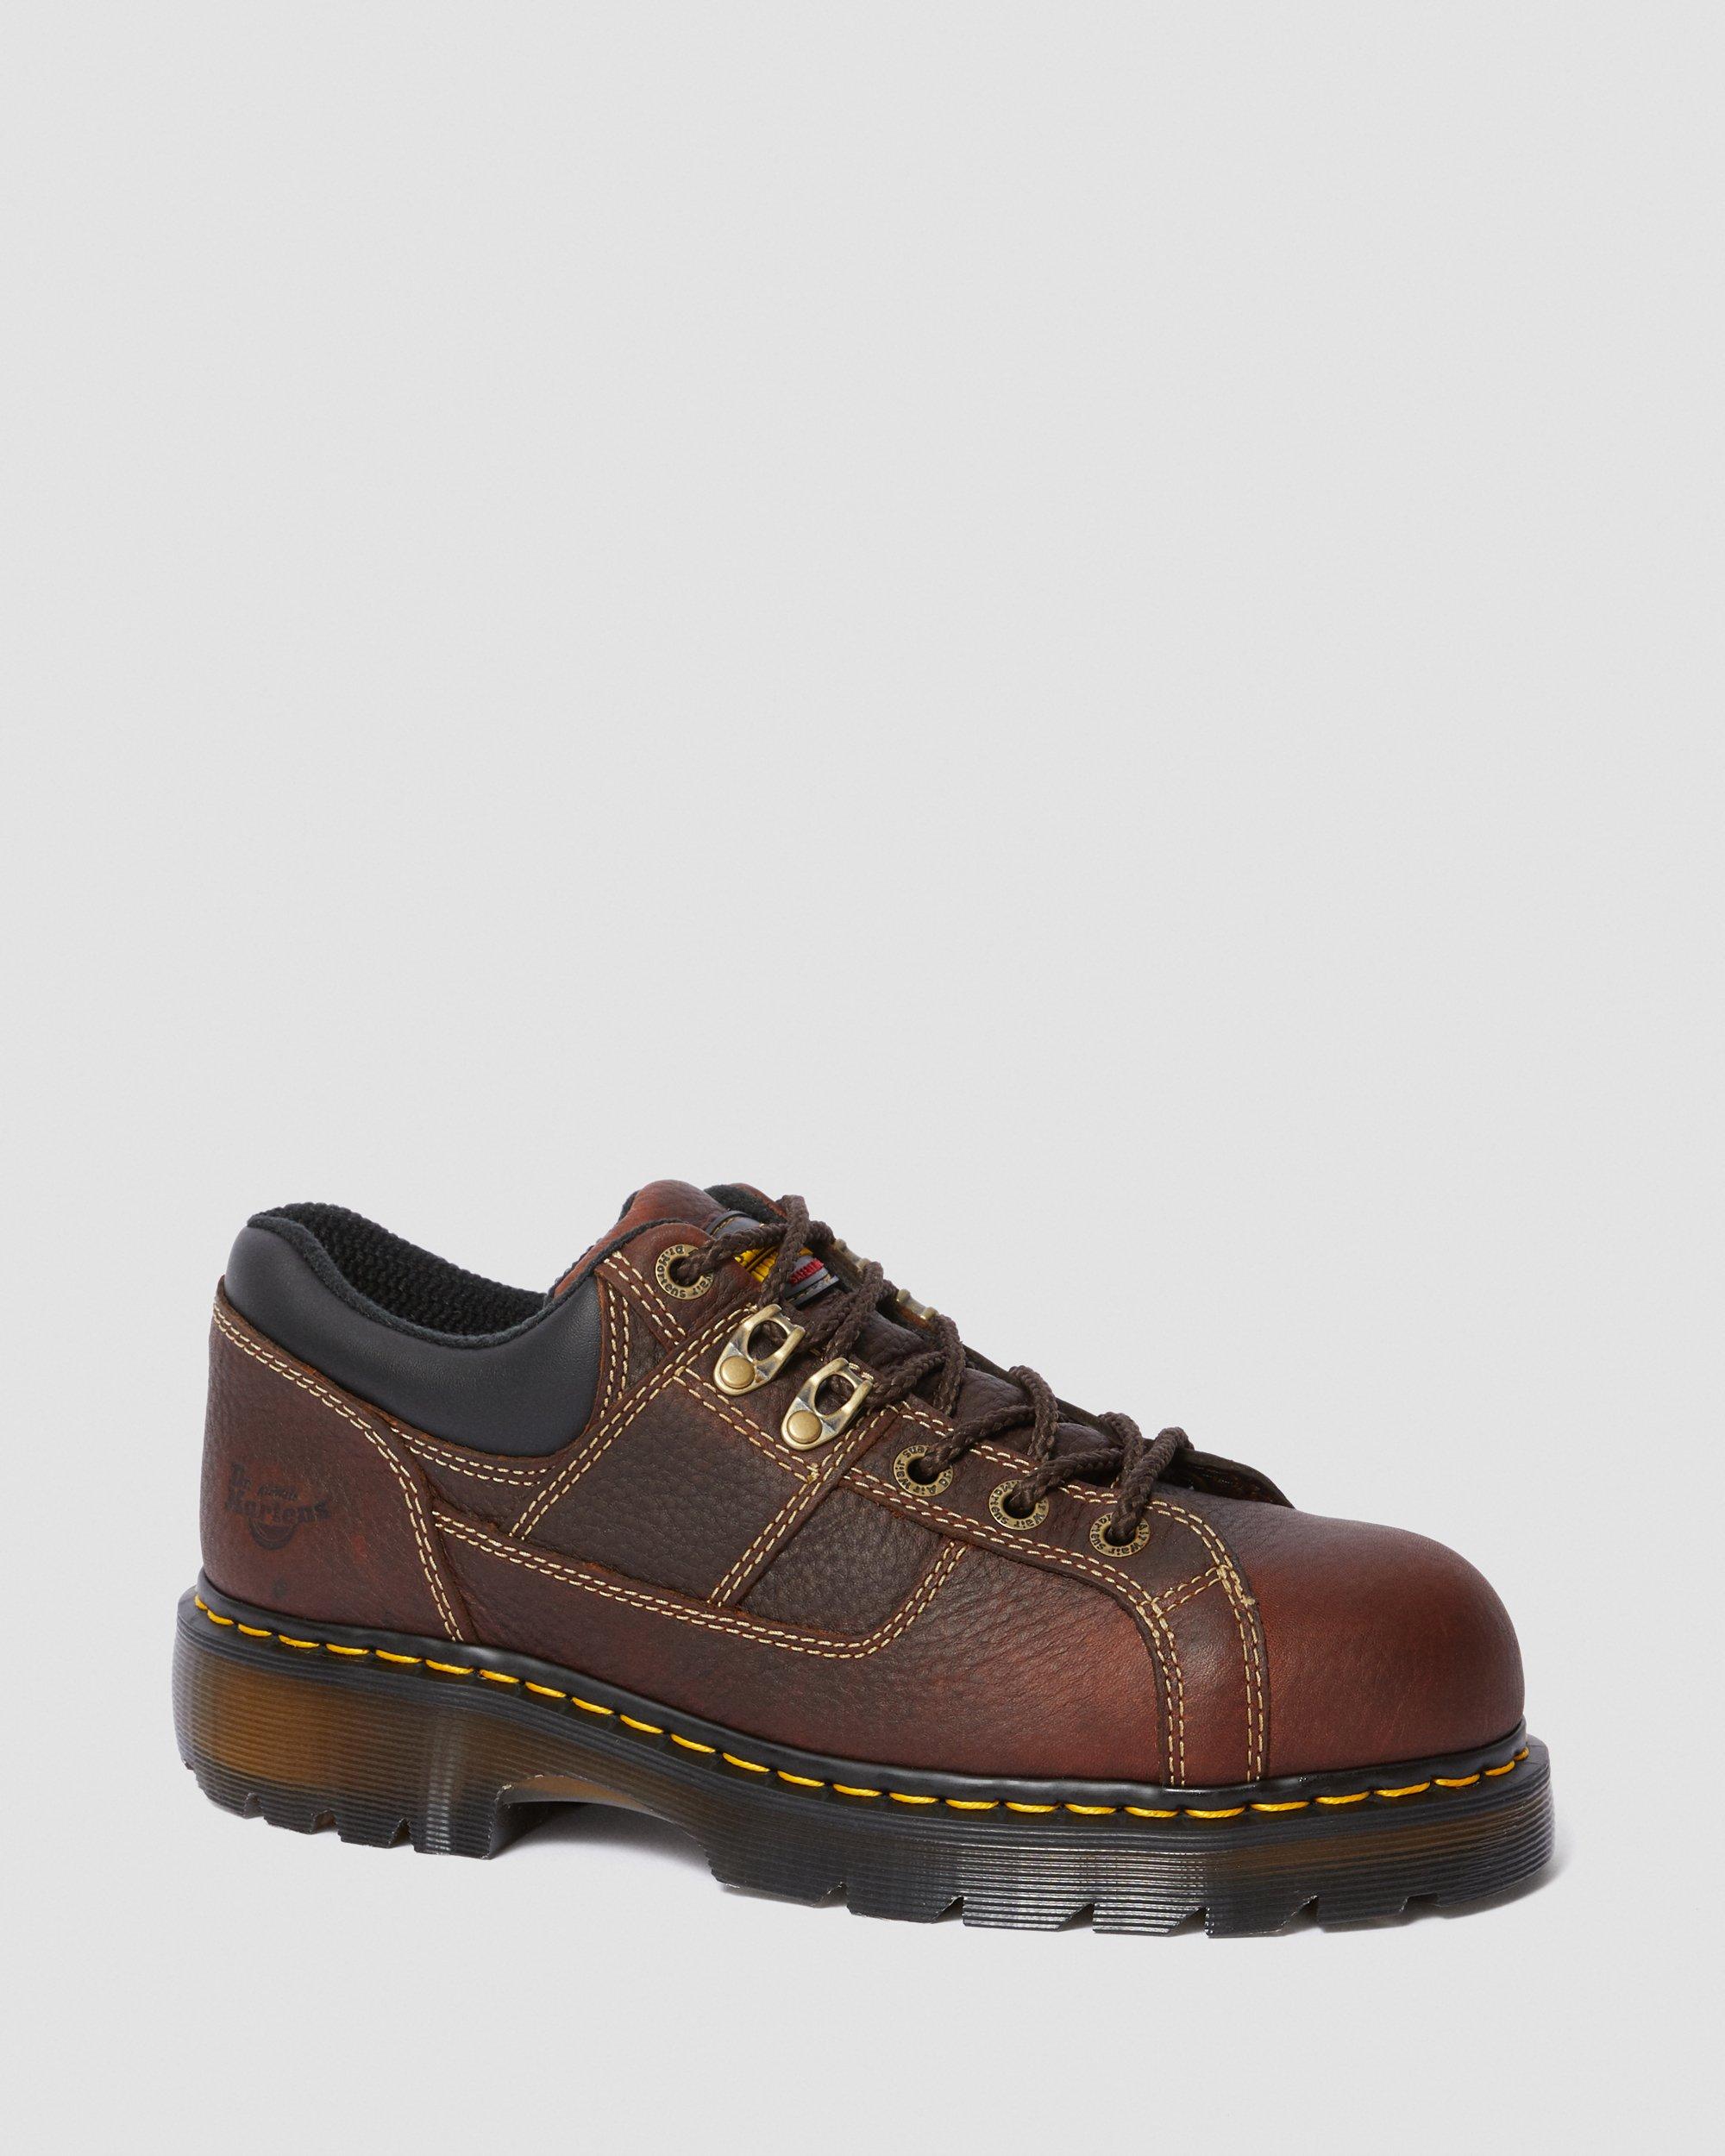 GUNBY LEATHER STEEL TOE WORK SHOES | Dr 